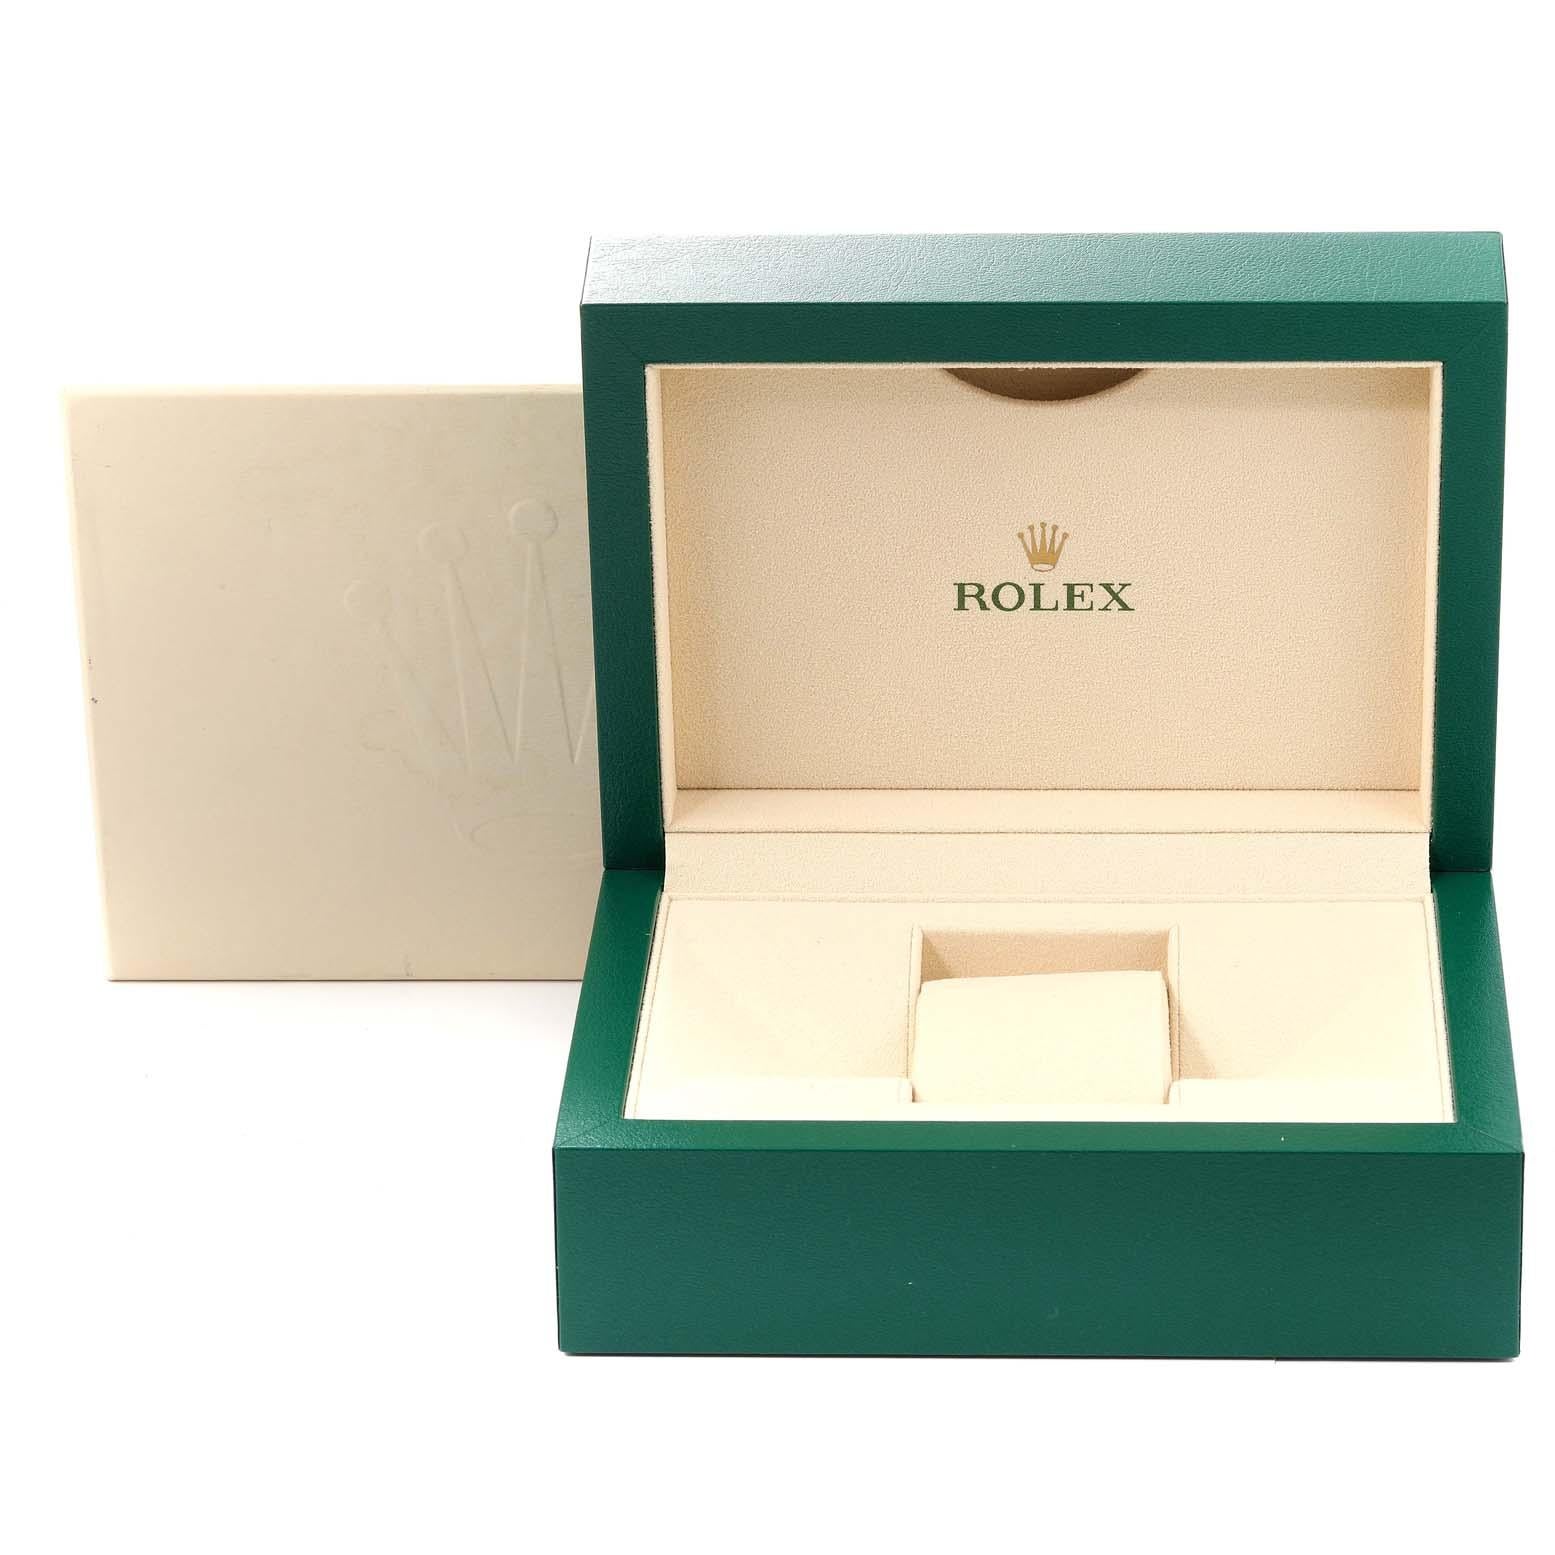 Rolex Oyster Perpetual 39 Rhodium Dial Steel Mens Watch 114300. Officially certified chronometer automatic self-winding movement. Stainless steel case 36.0 mm in diameter. Rolex logo on a crown. Stainless steel smooth domed bezel. Scratch resistant